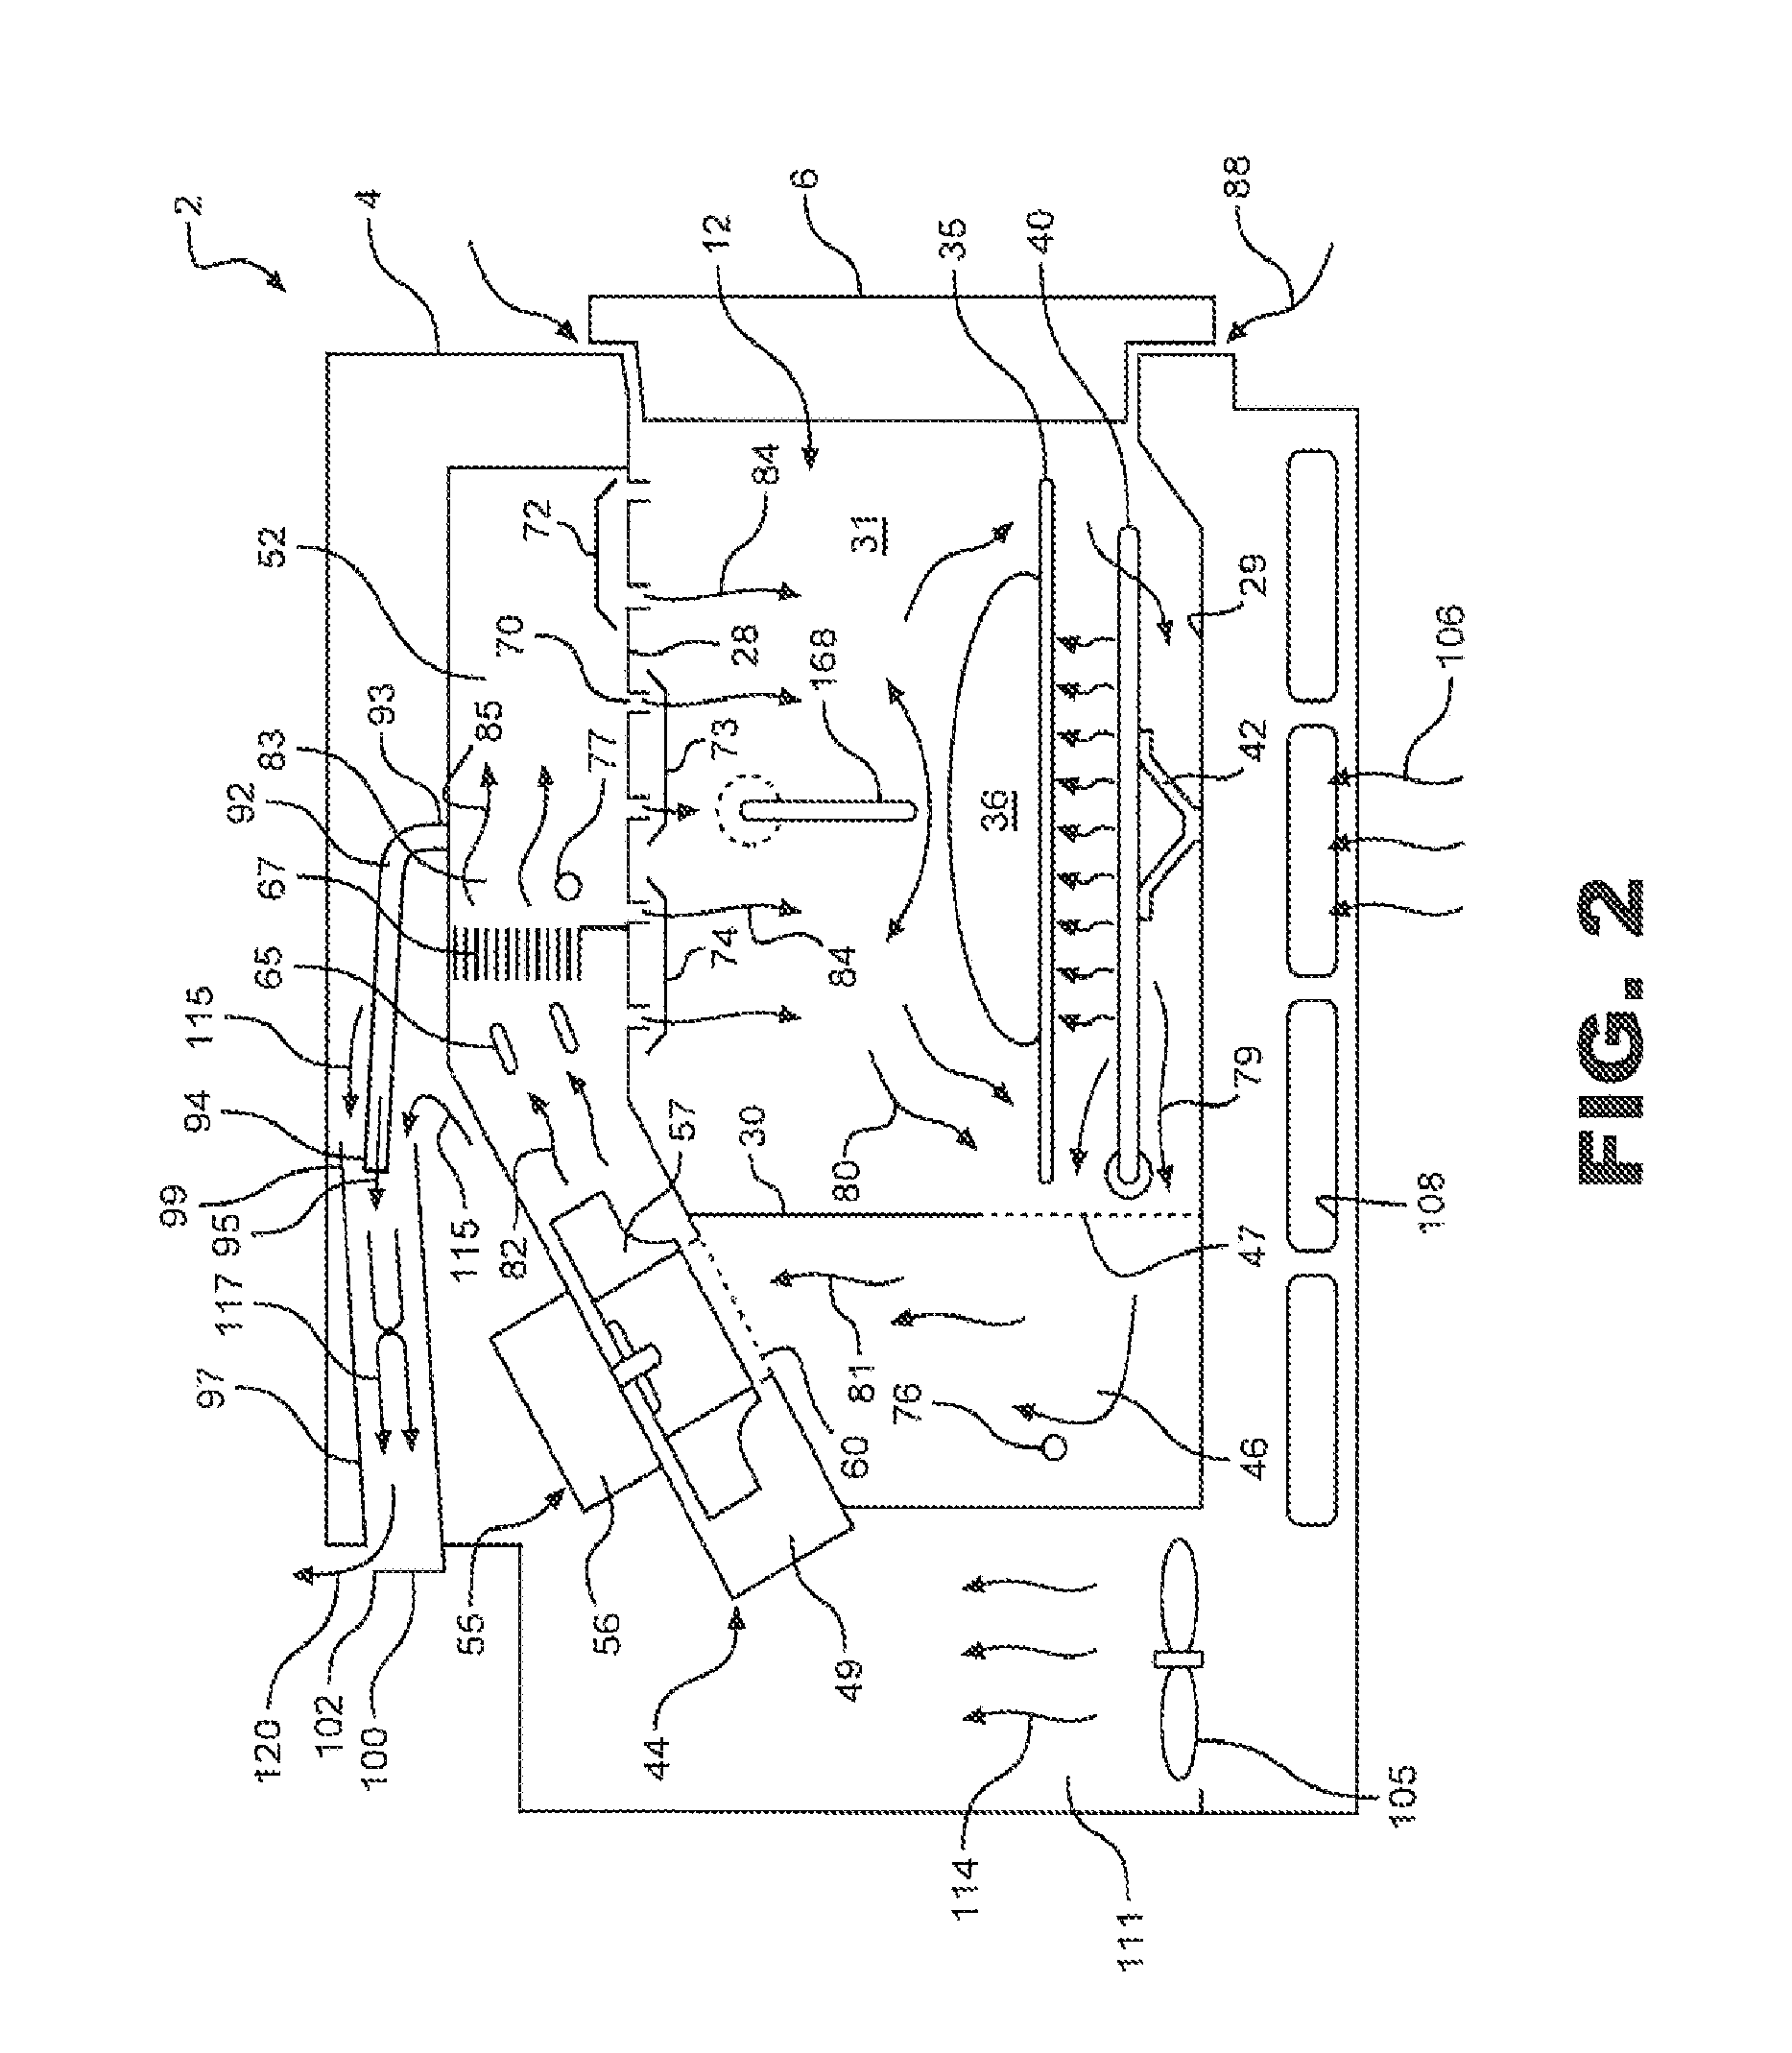 Air circuit for cooking appliance including combination heating system